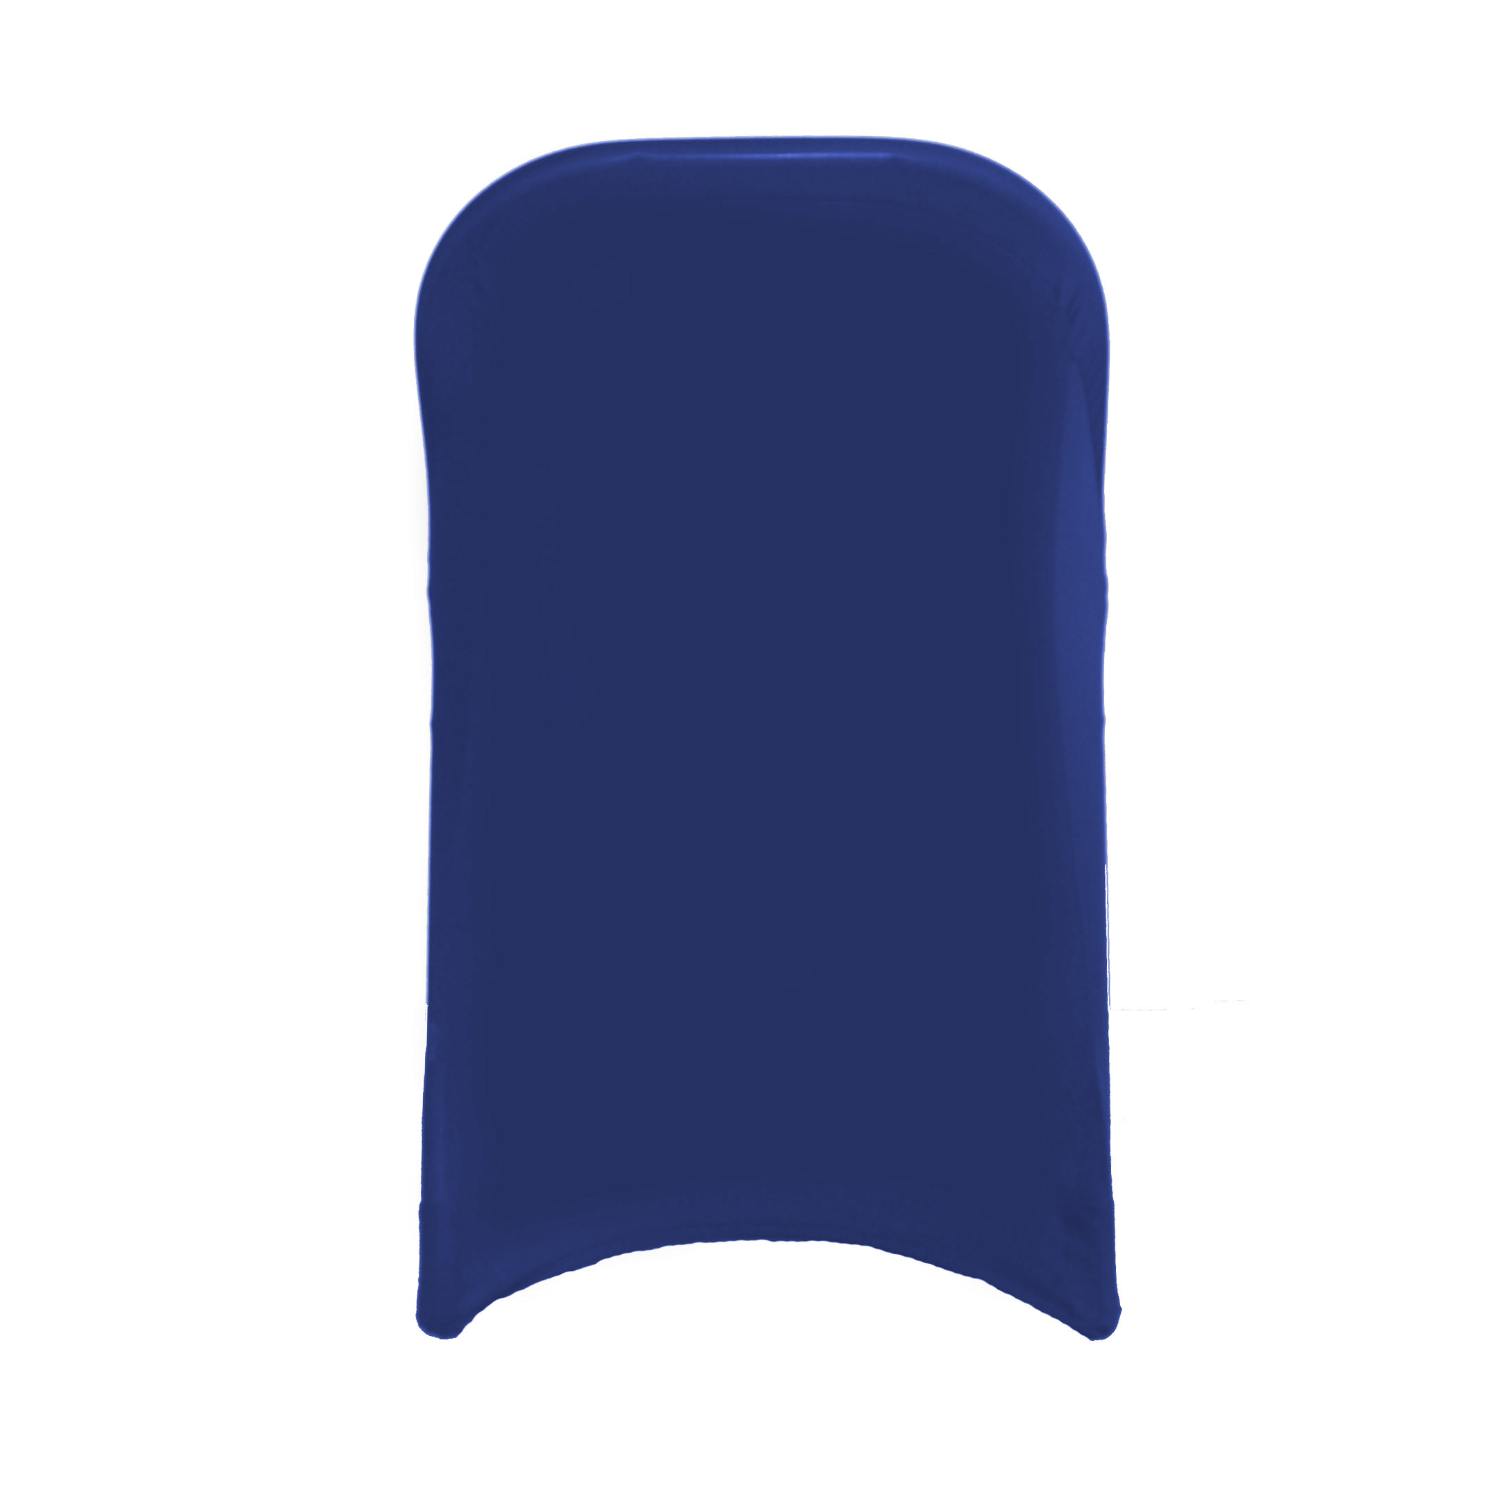 Your Chair Covers - Spandex Folding Chair Cover Royal Blue for Wedding, Party, Birthday, Patio, etc. - image 2 of 3